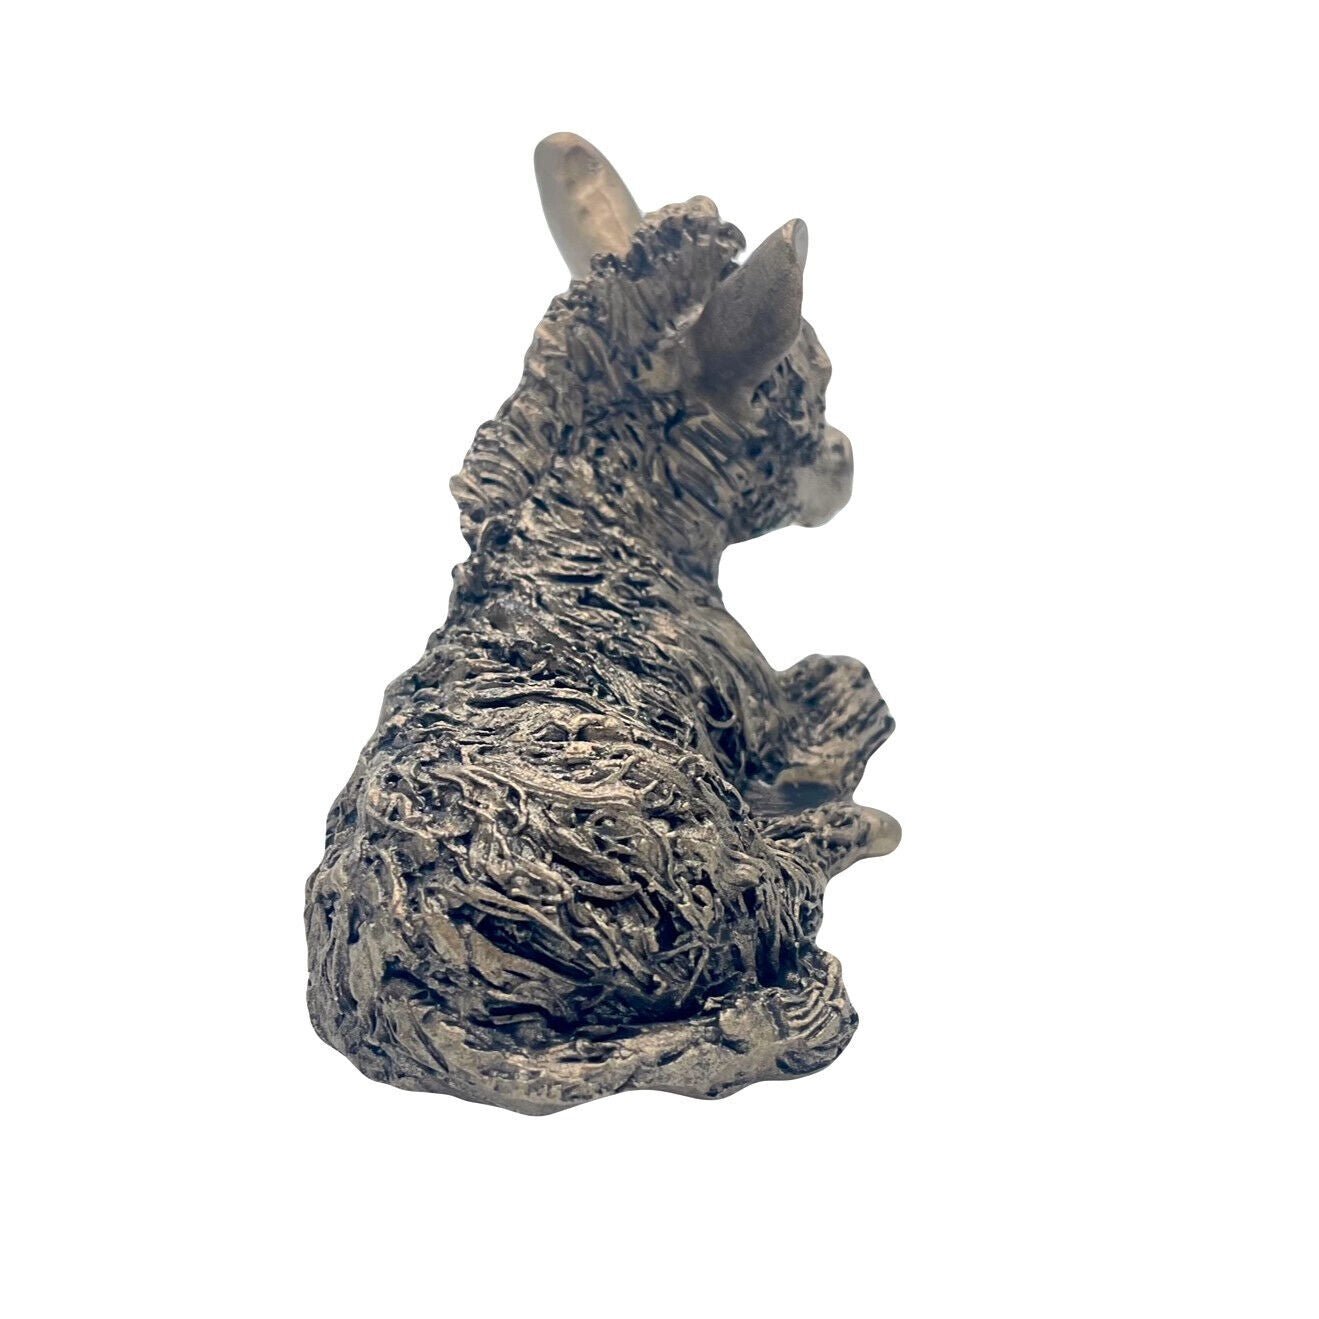 Frith - Baby Donkey Sitting Sculpture By Veronica Ballan VB018